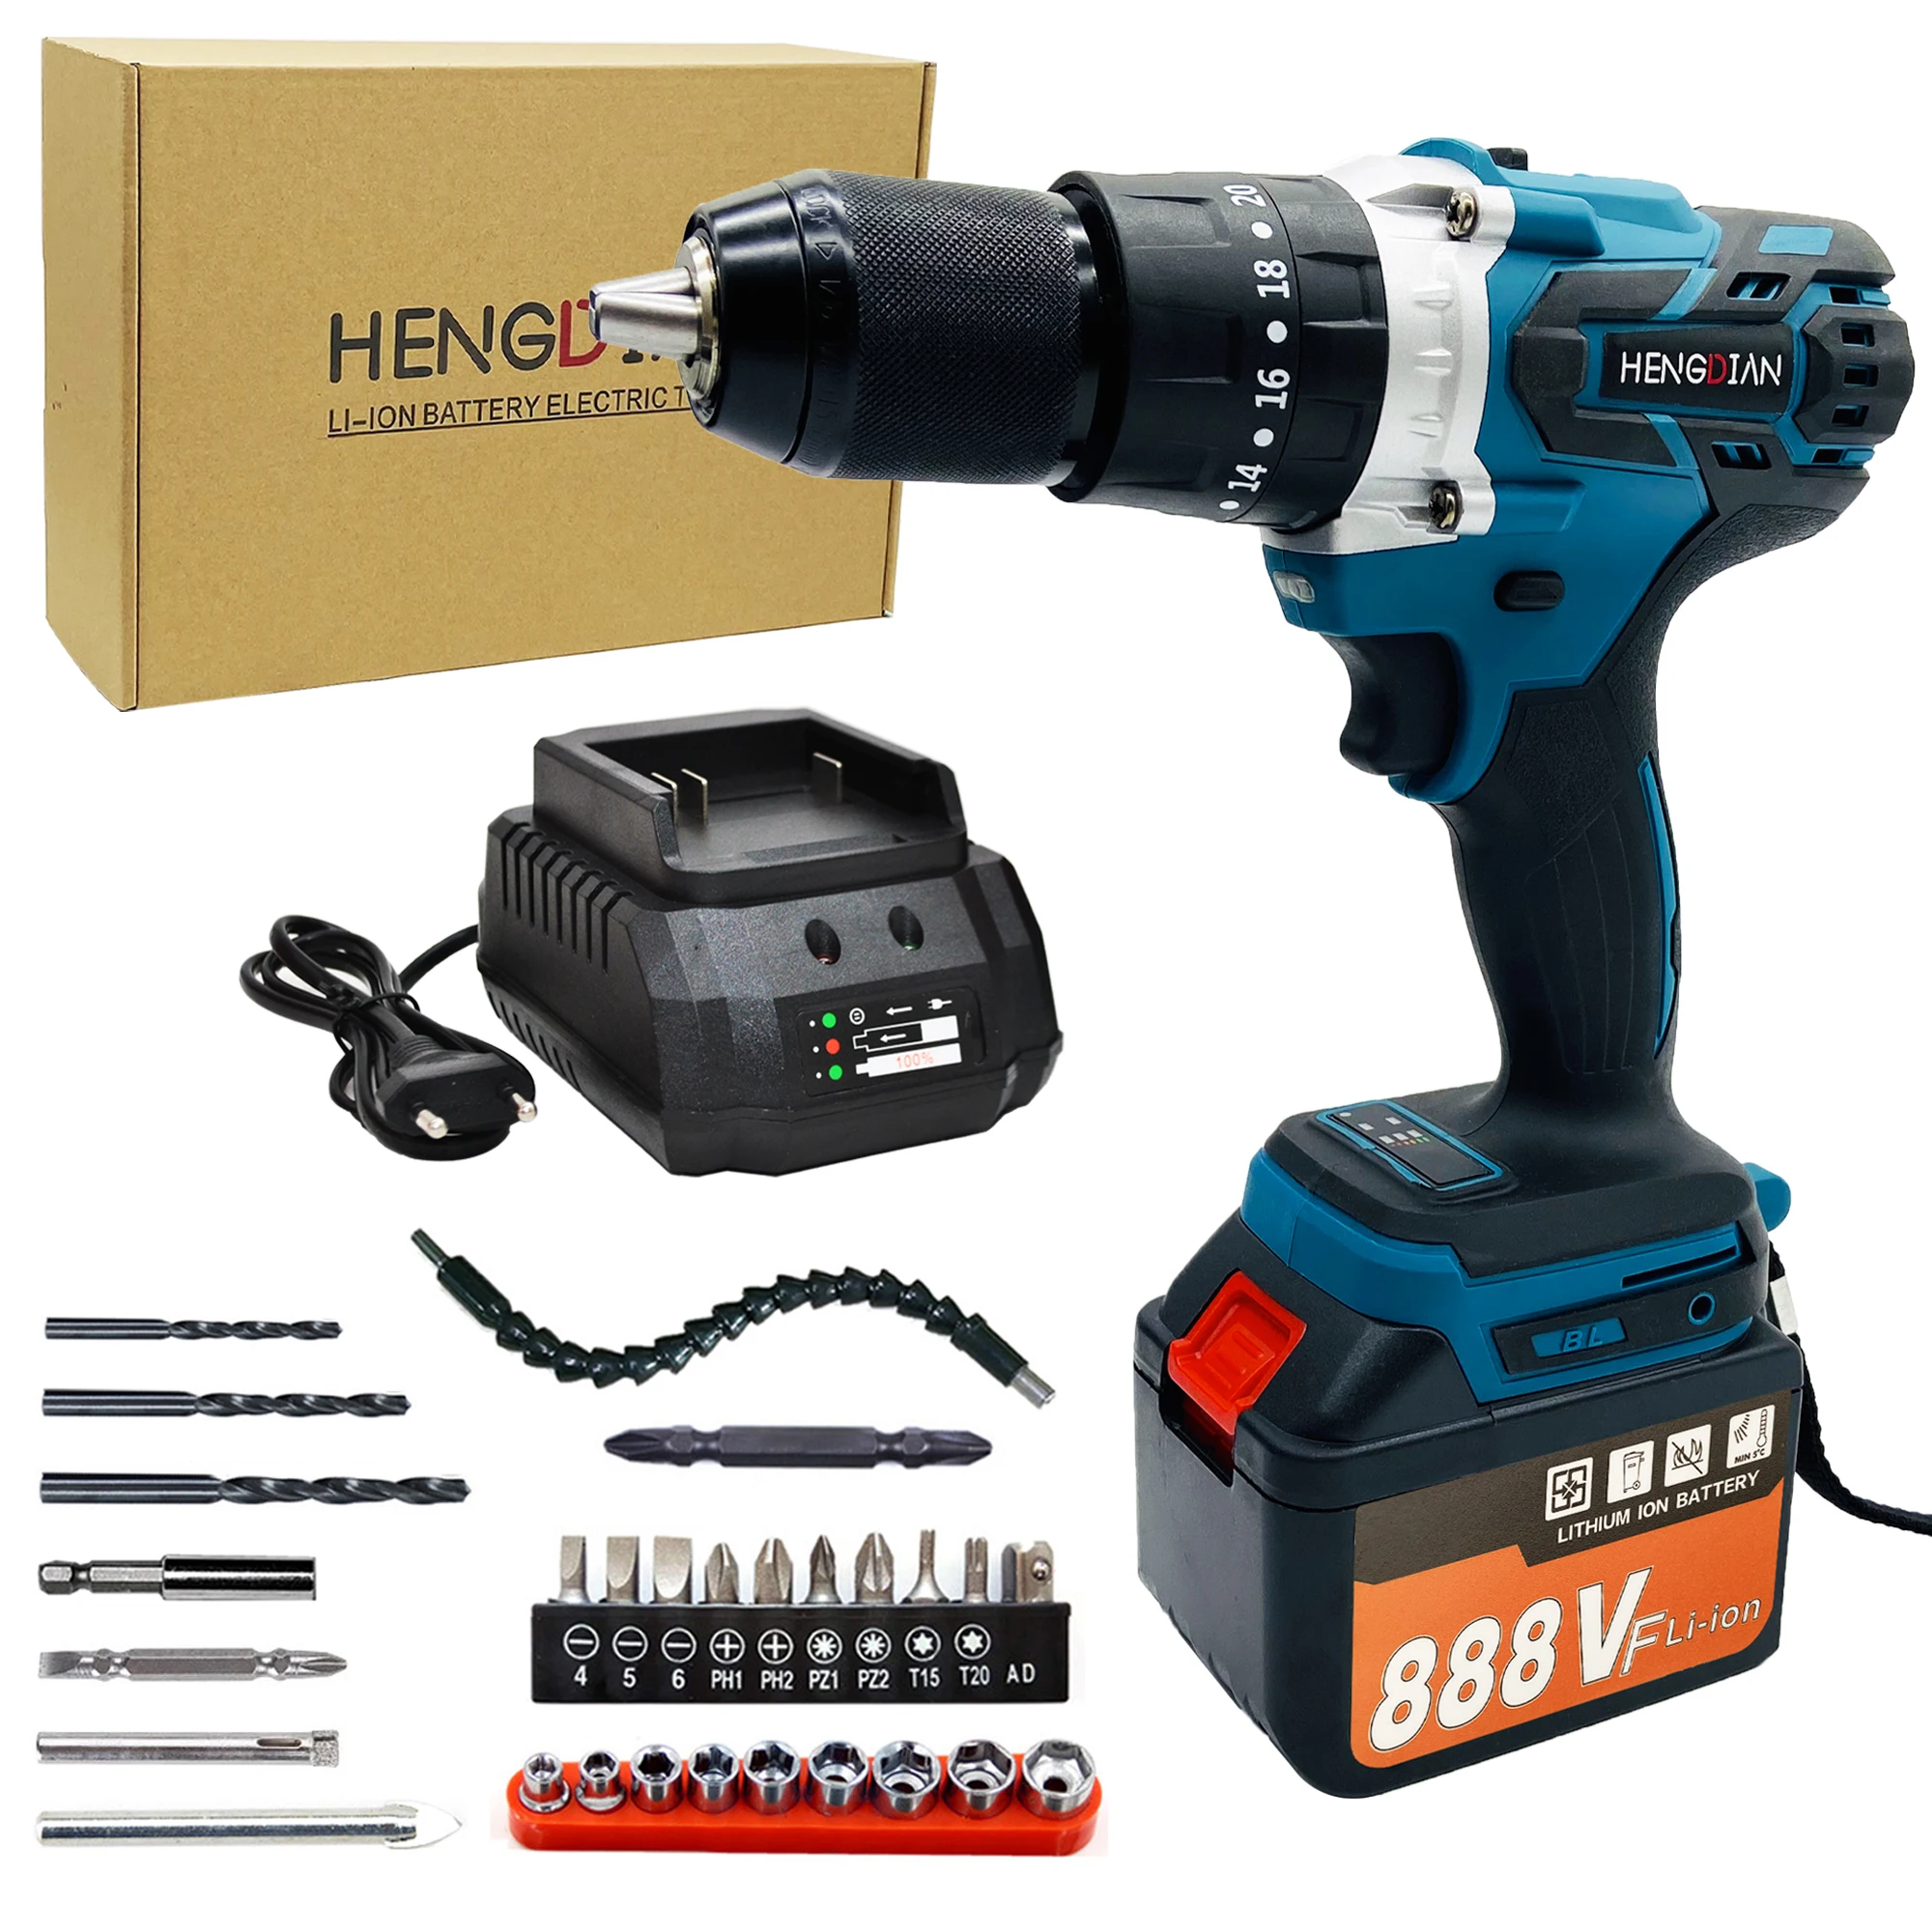 20V Brushless Battery Screwdriver Craft Drill Set Adjustable Torque Machine Impact Cordless Power Tools Electric Drill cordless impact screwdriver machine brushless electric screwdriver drill driver with two speed adjustment and powerful drill bit